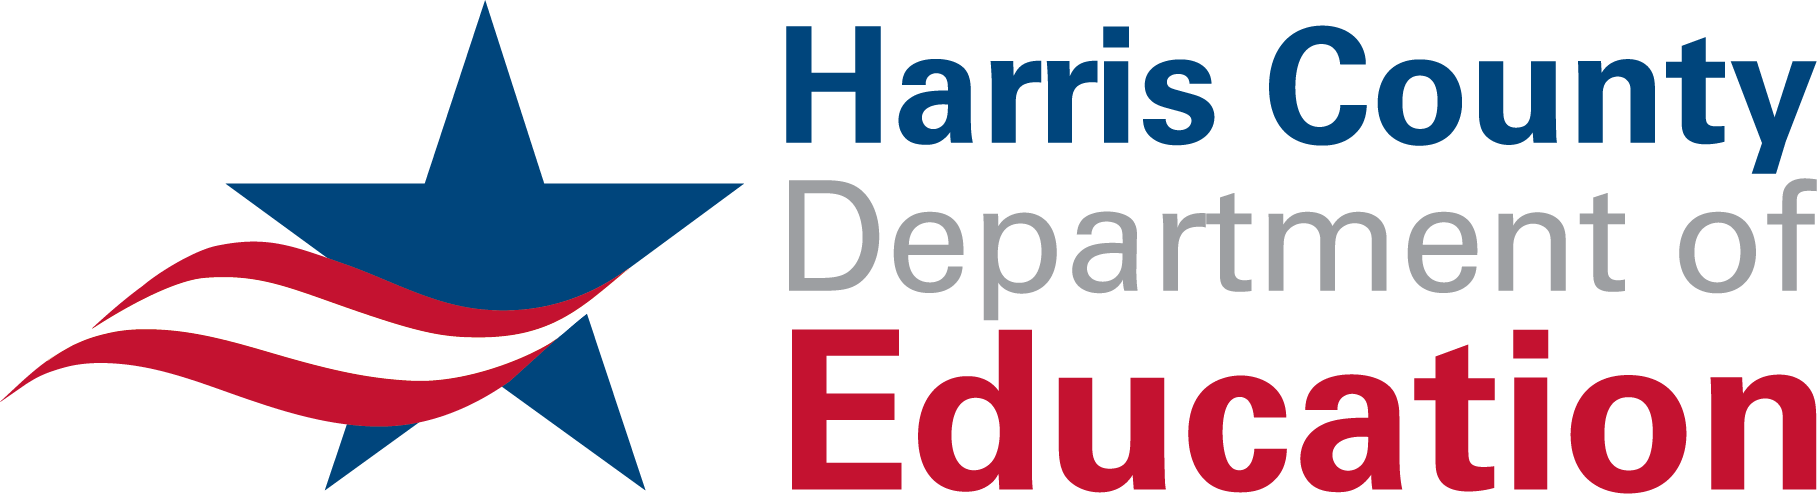 See the Impact - Logo - https://s41078.pcdn.co/wp-content/uploads/2020/03/Education_Harris-County.png